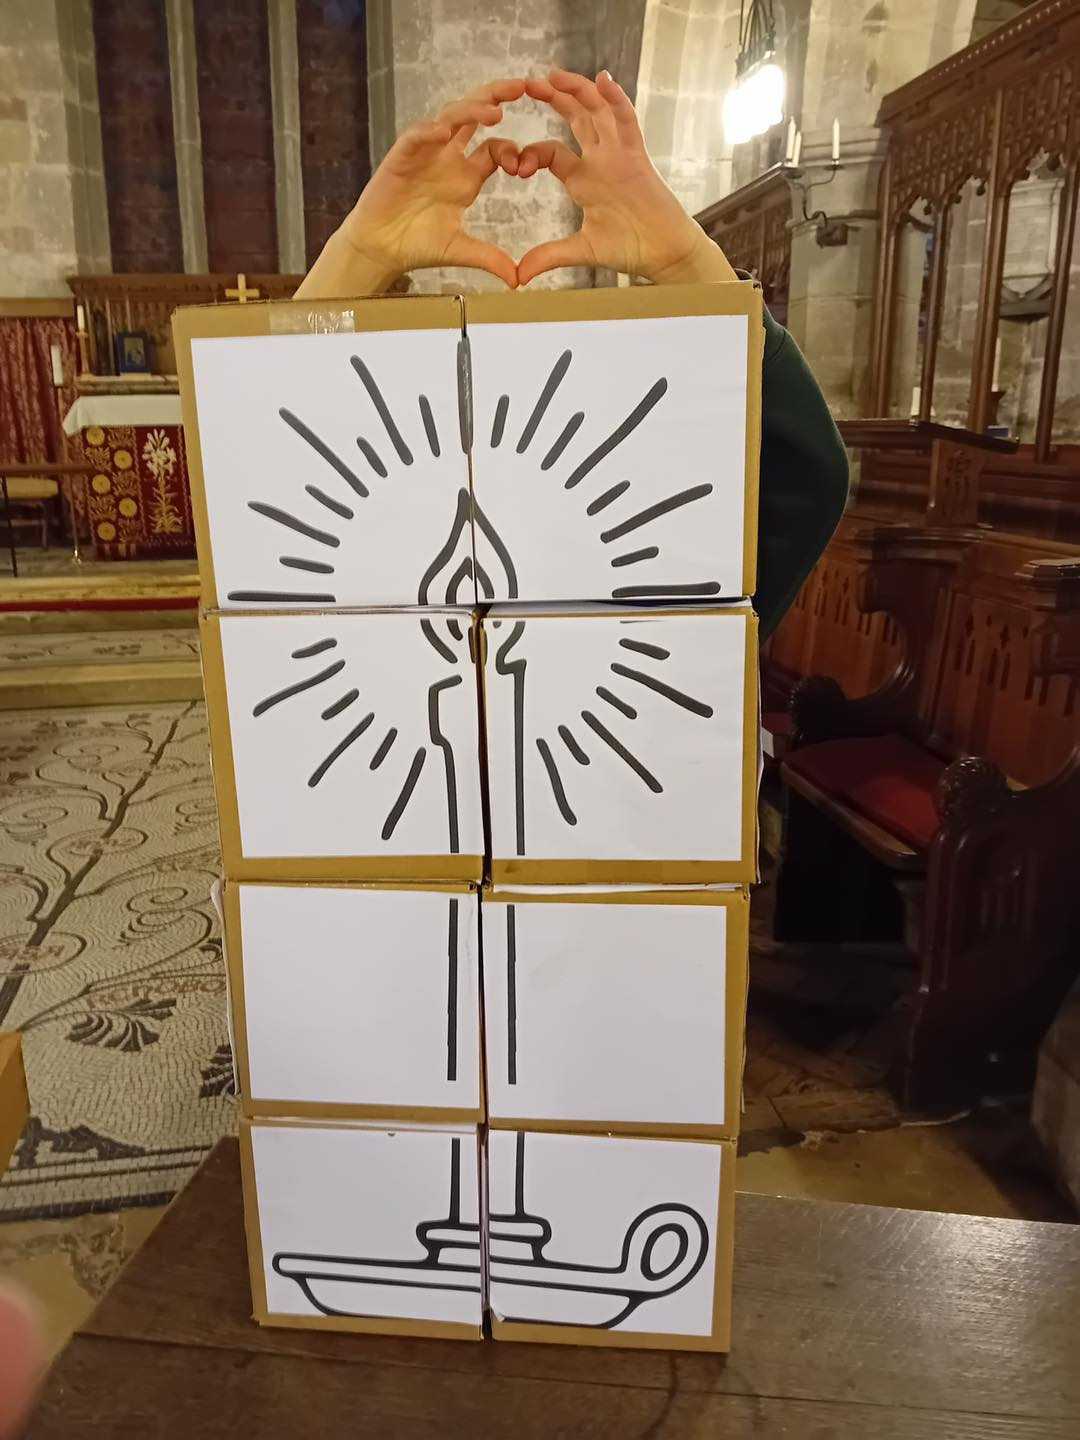 Christingles unfolding cardboard cube being used in church